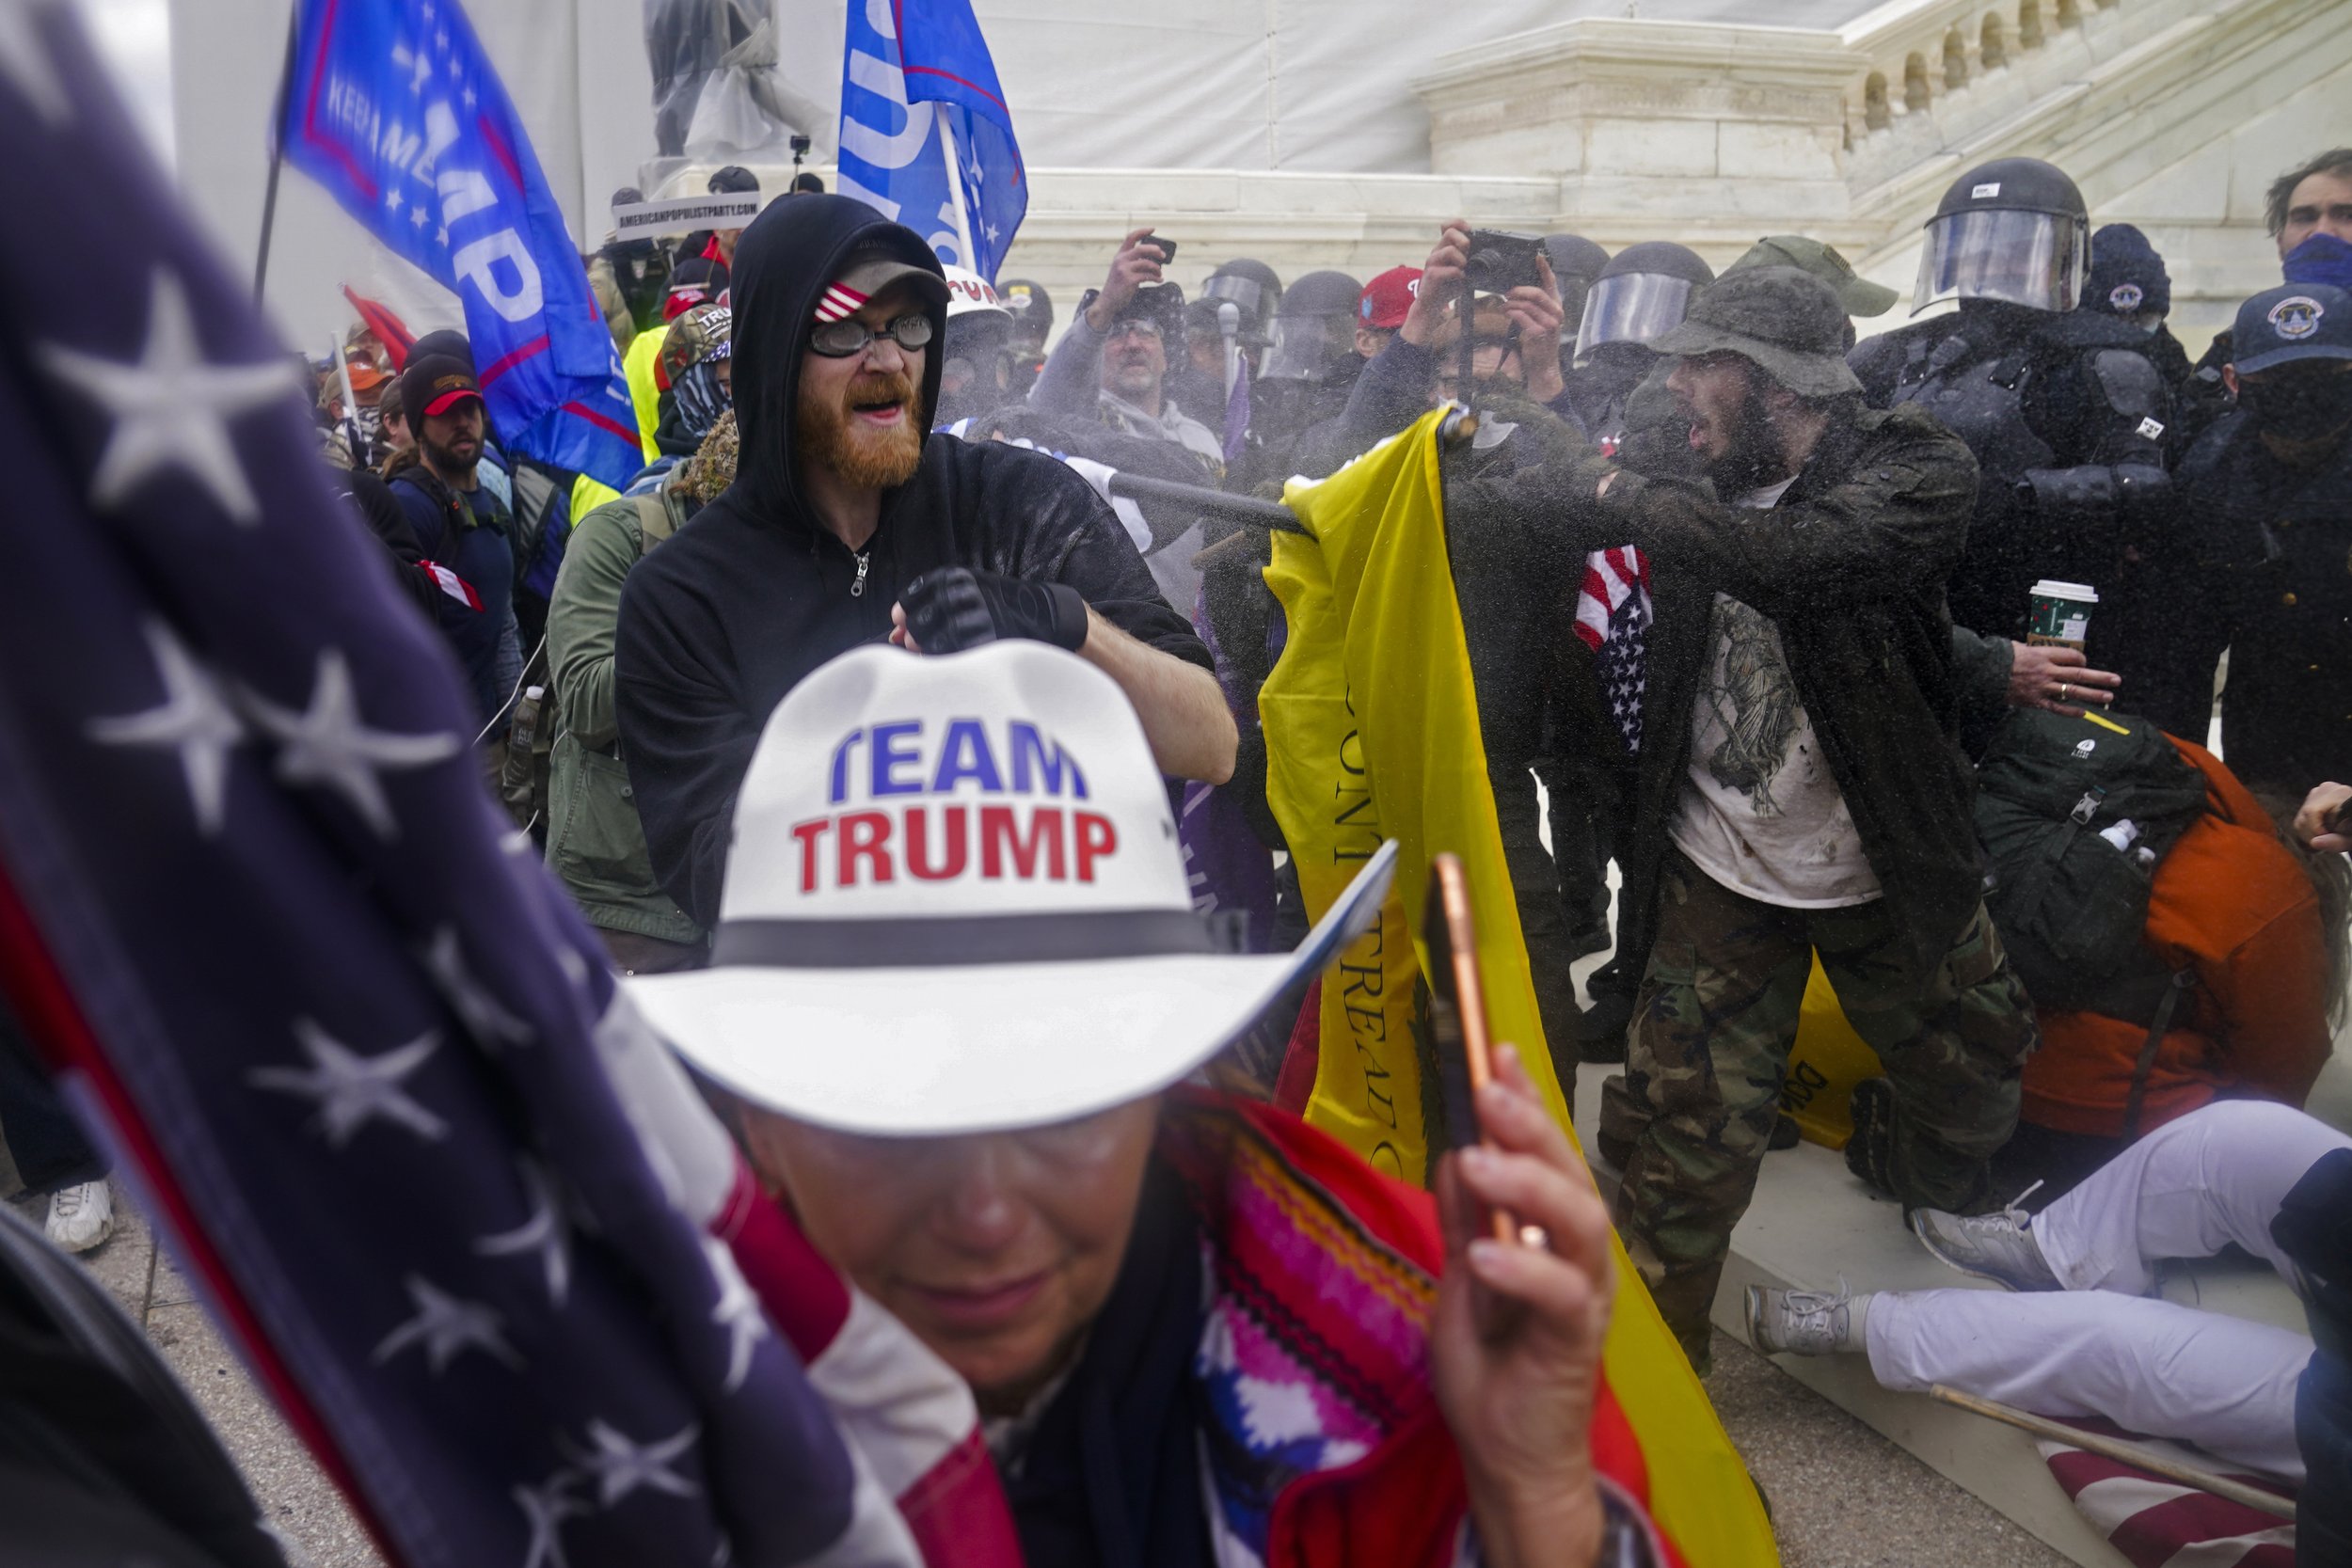  Trump supporters try to break through a police barrier at the Capitol in Washington, on Jan. 6, 2021, as Congress prepared to affirm President-elect Joe Biden's victory. (AP Photo/John Minchillo) 